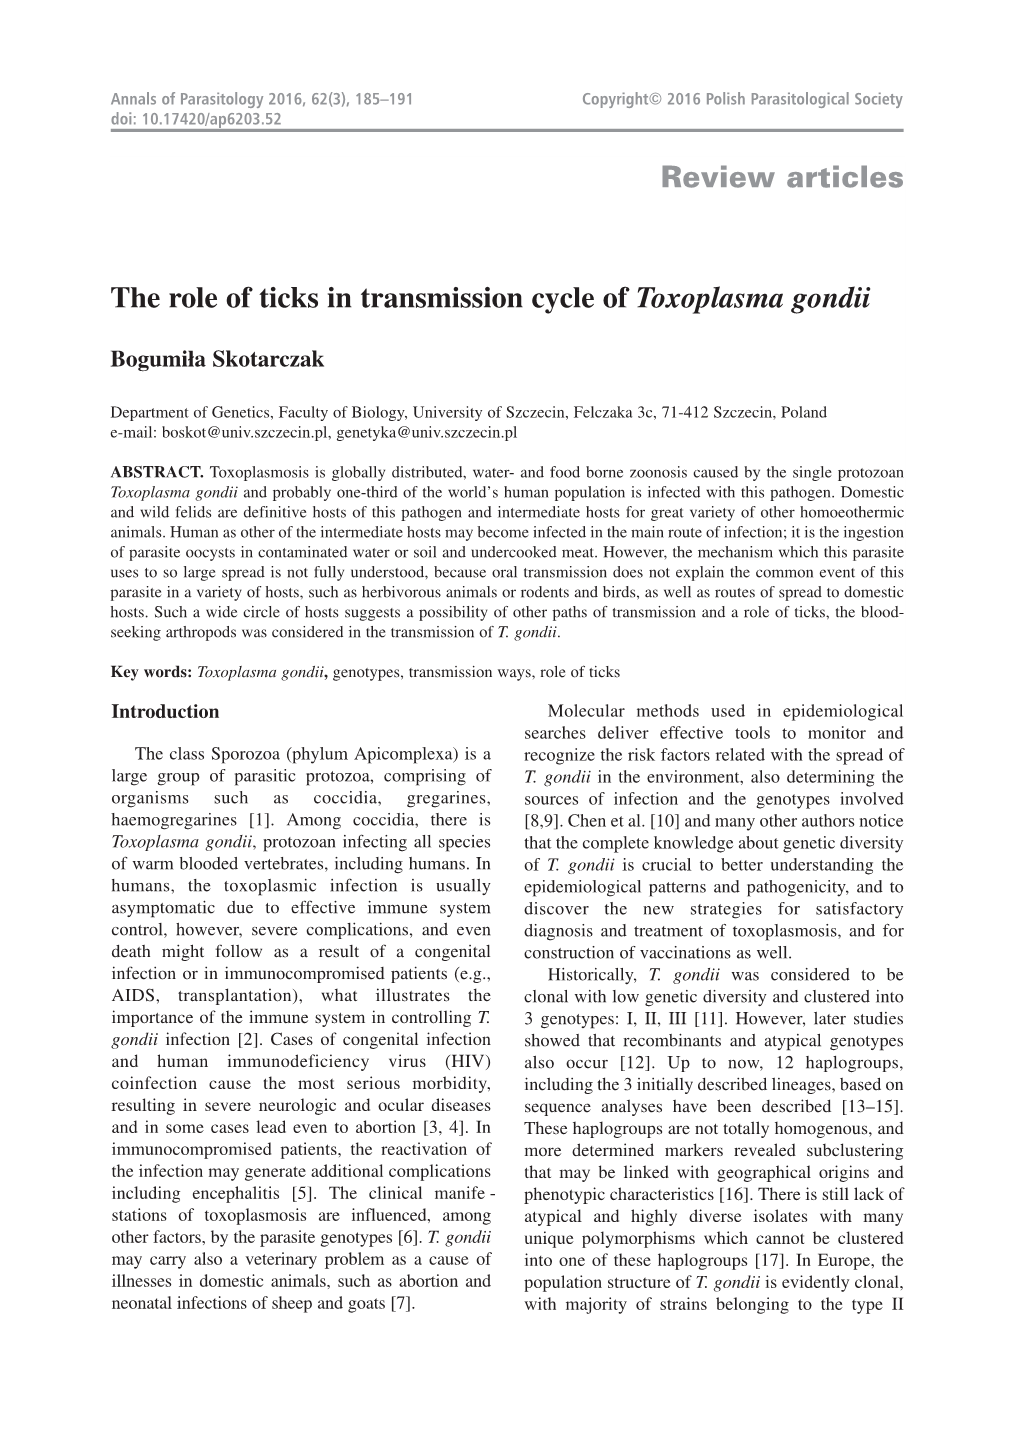 The Role of Ticks in Transmission Cycle of Toxoplasma Gondii